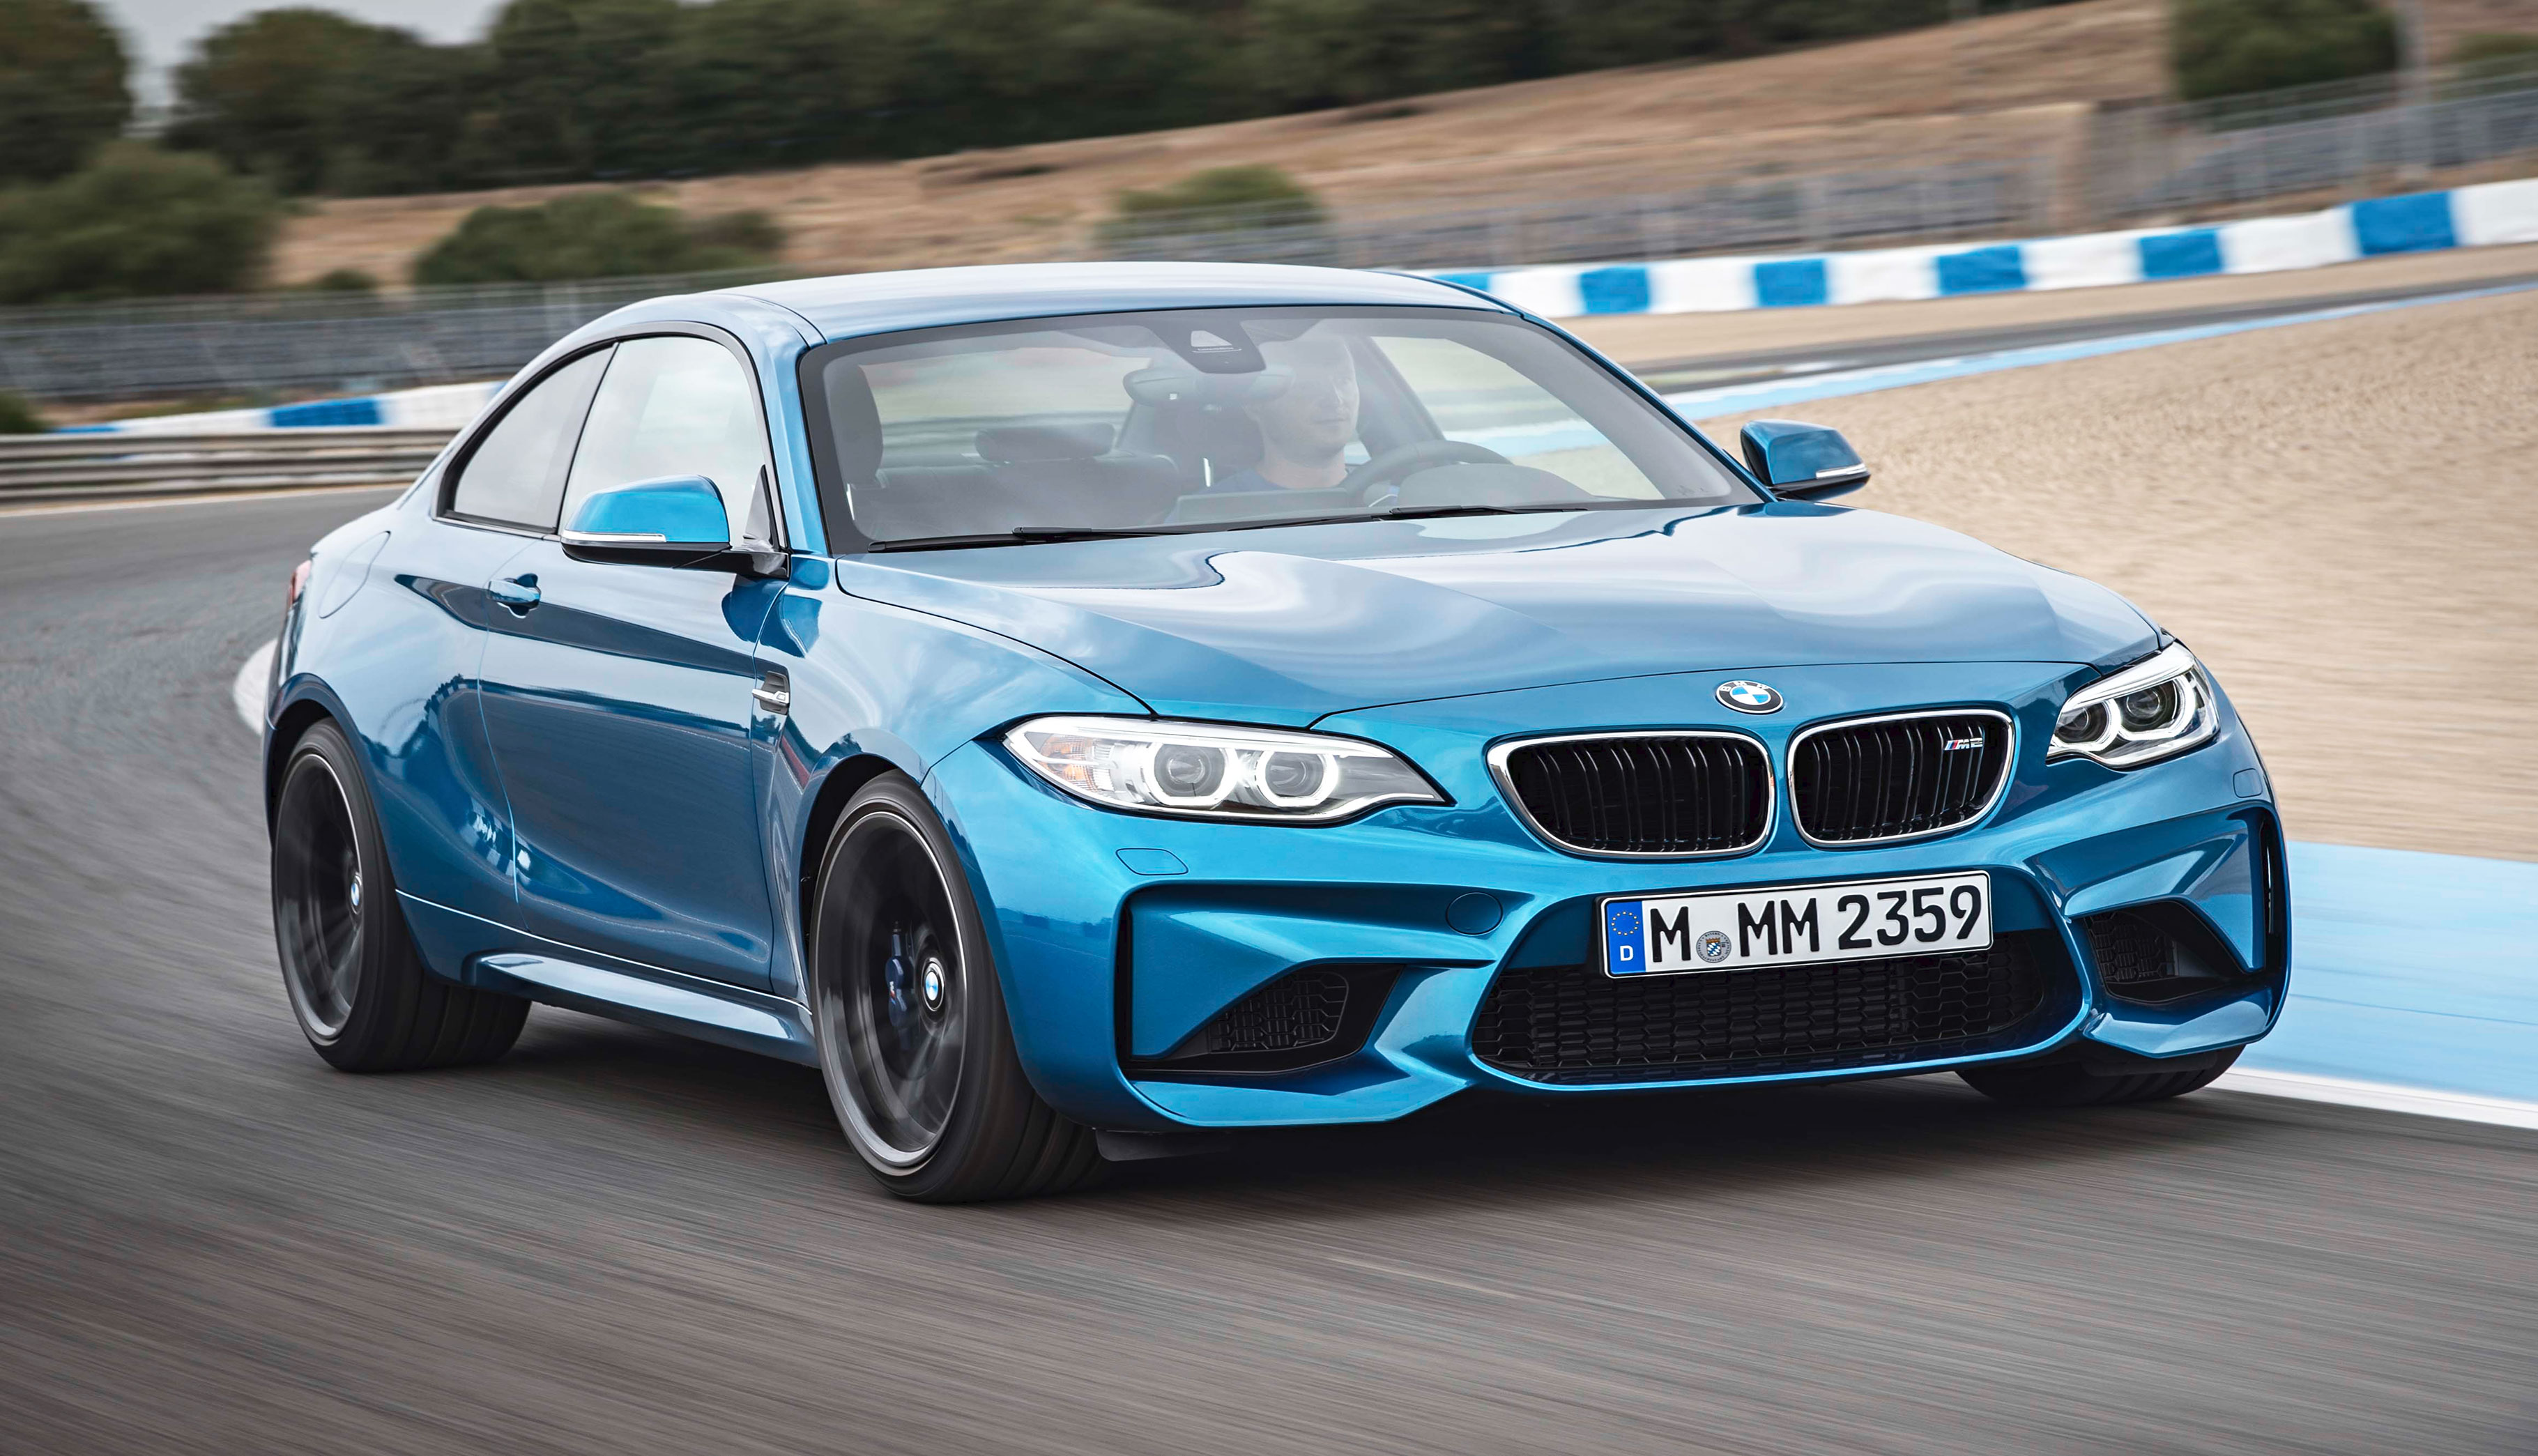 2016 BMW M2 Coupe Be Impactful